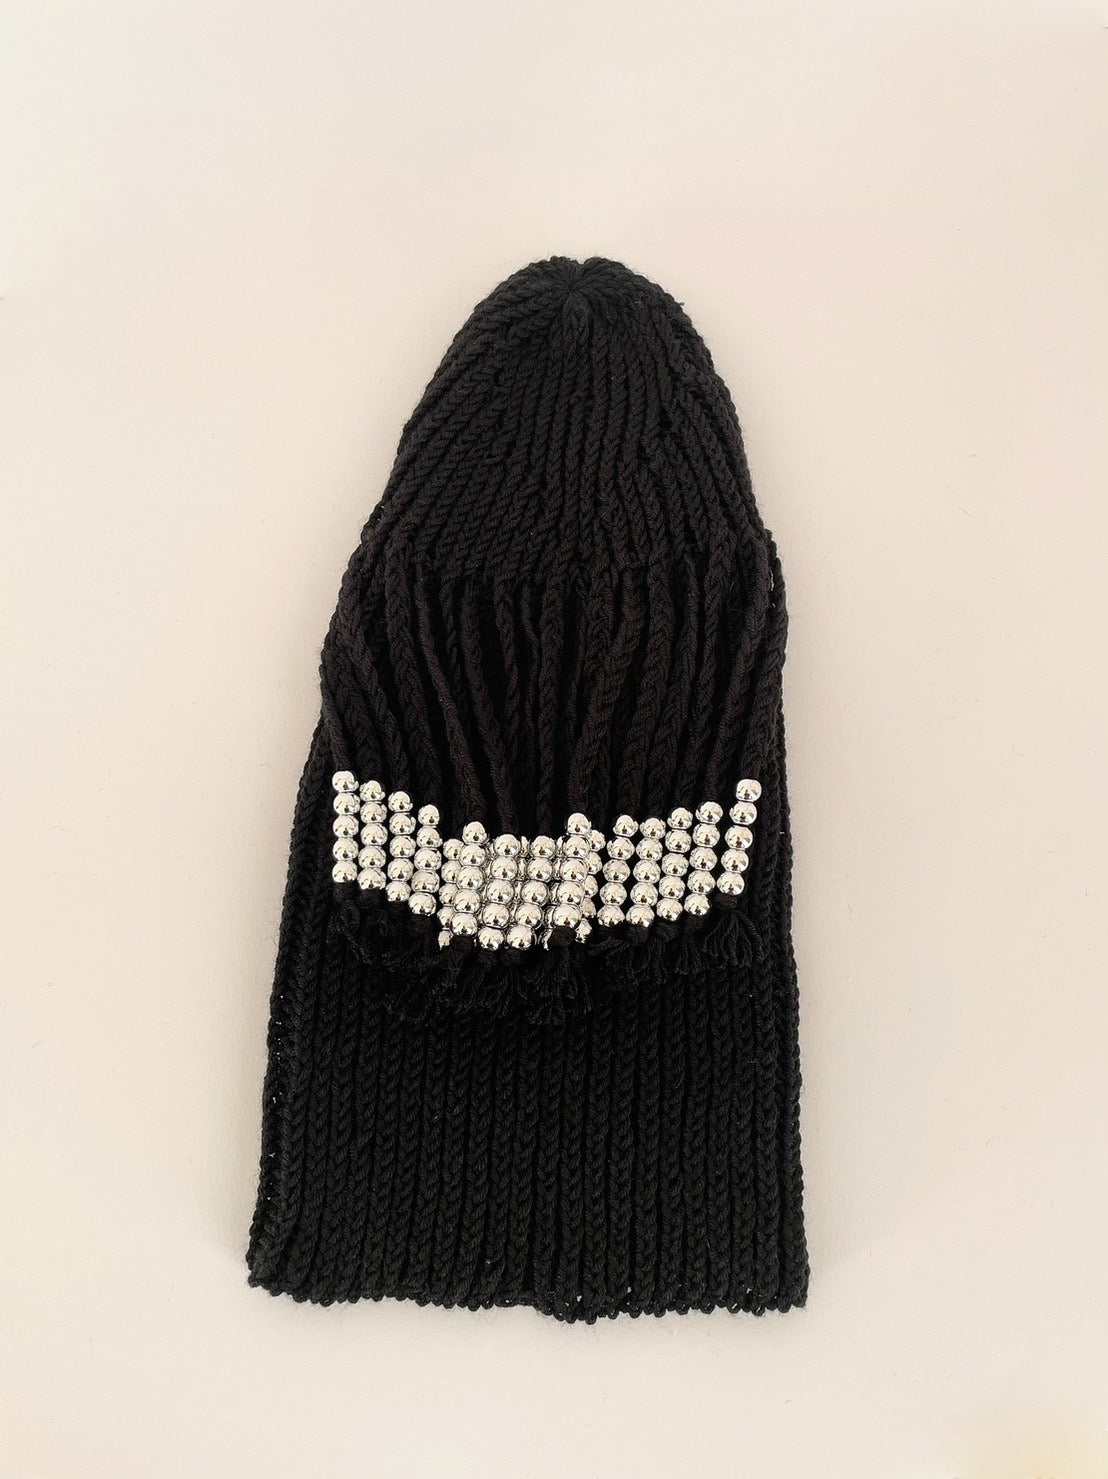 【WOOL】BLACK with SILVER BEADS